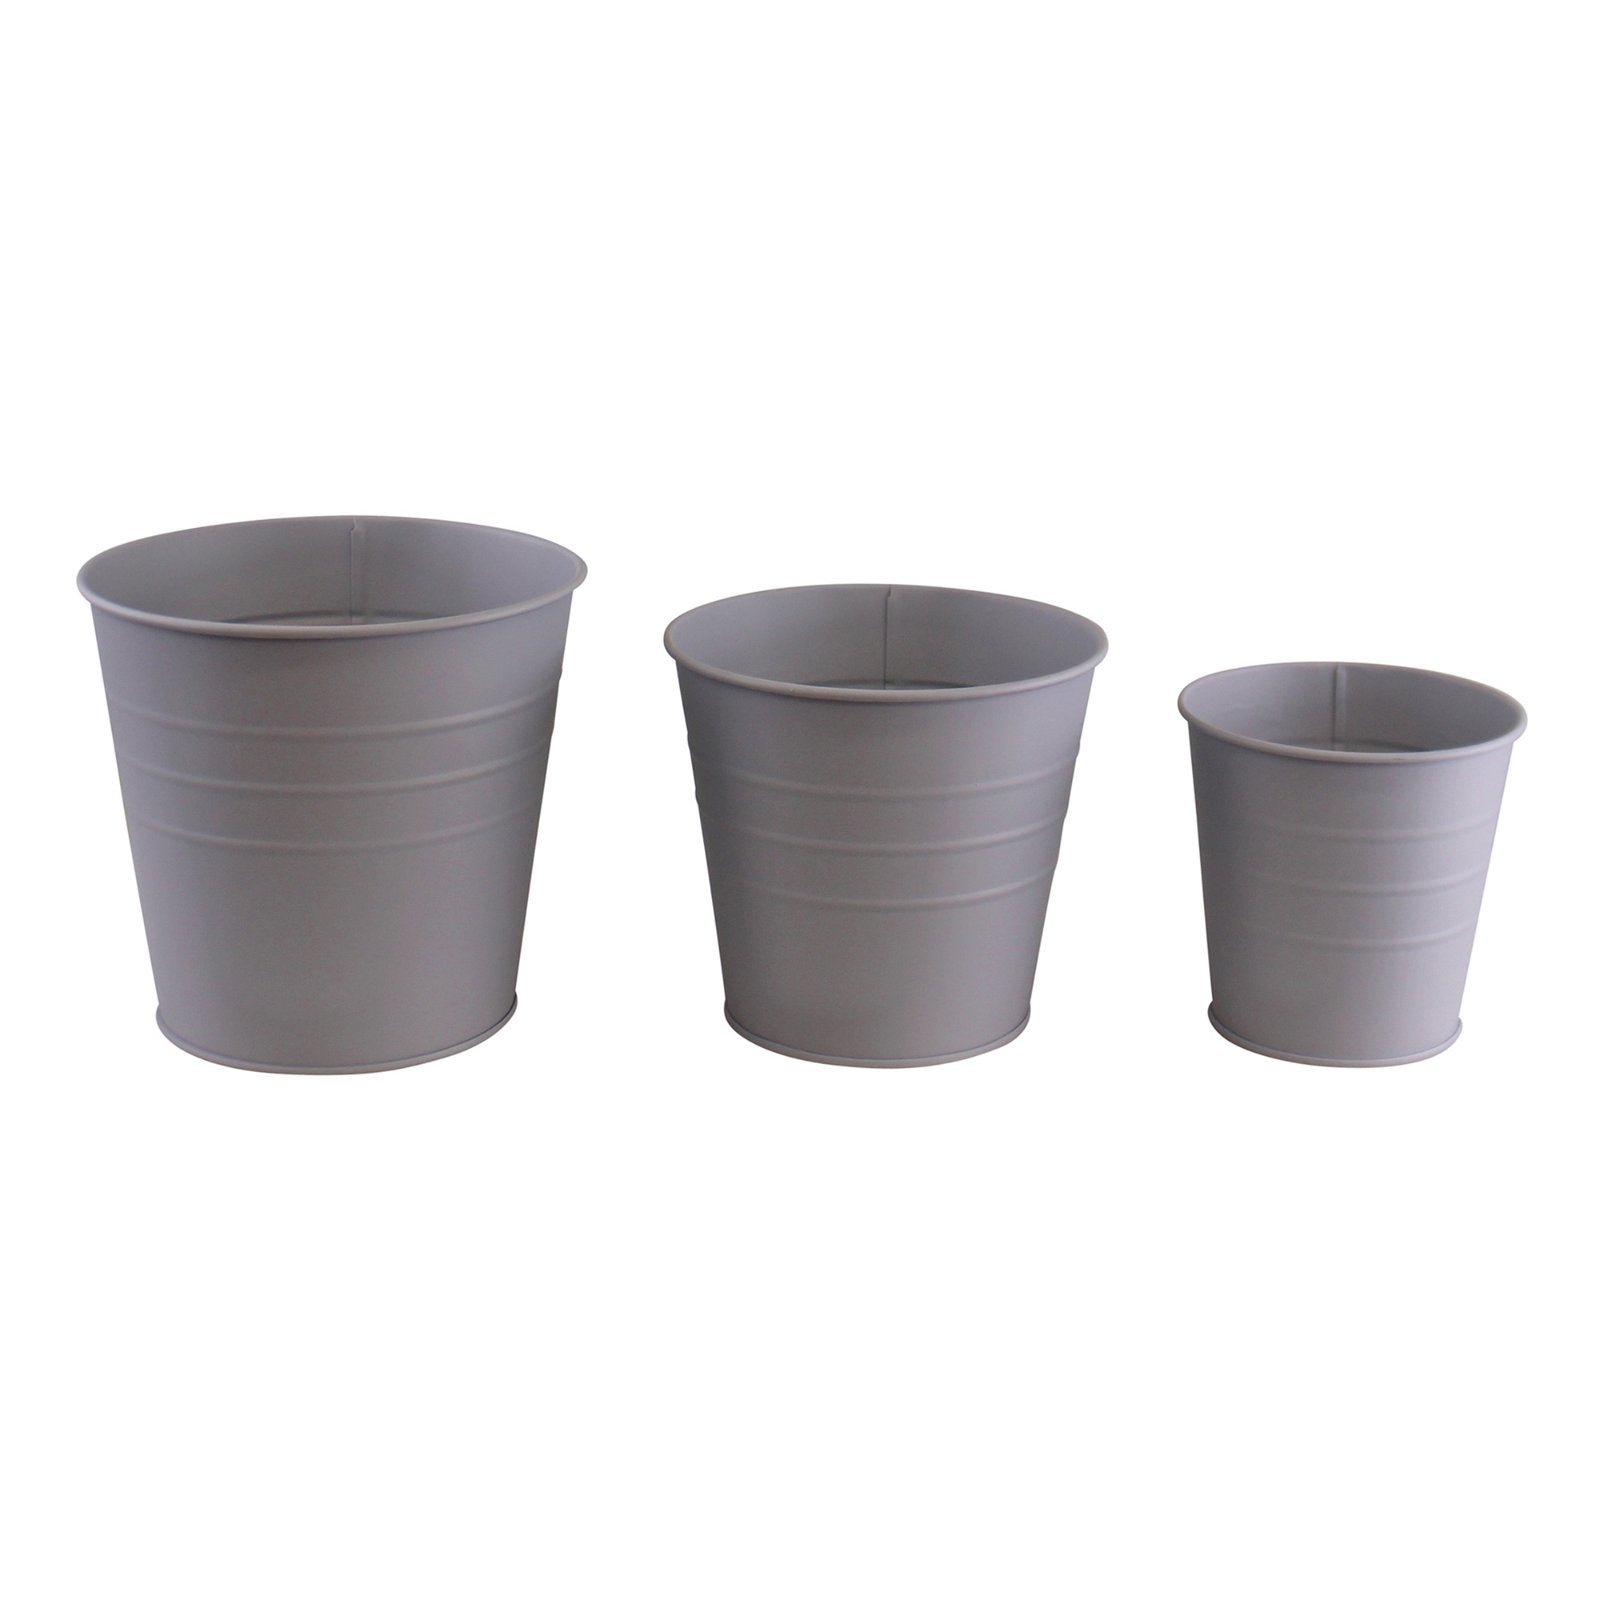 Set of 3 Round Metal Planters, Grey Willow and Wine